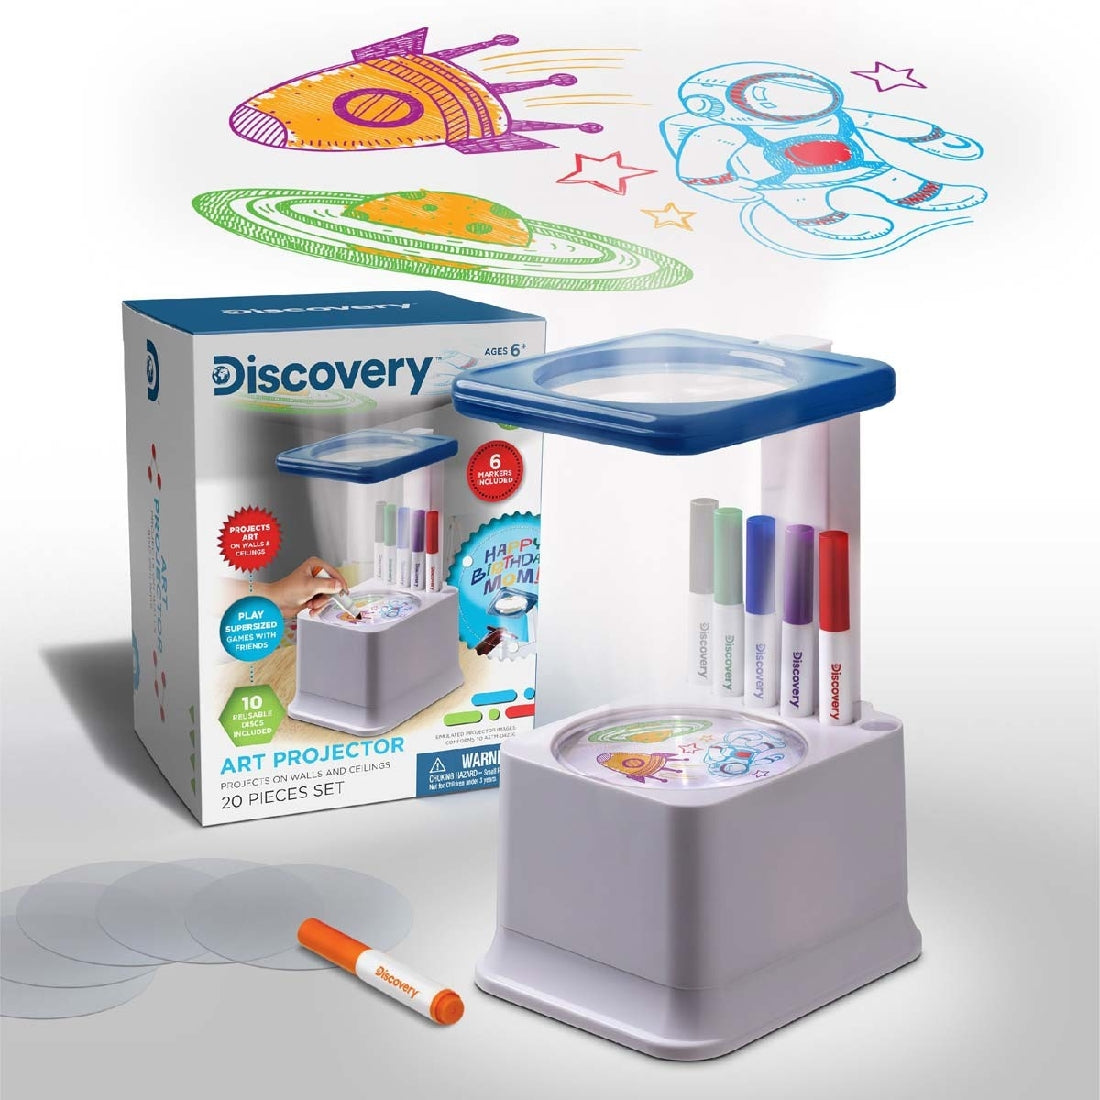 Discovery Toy Sketcher Projector with 6 Color Markers